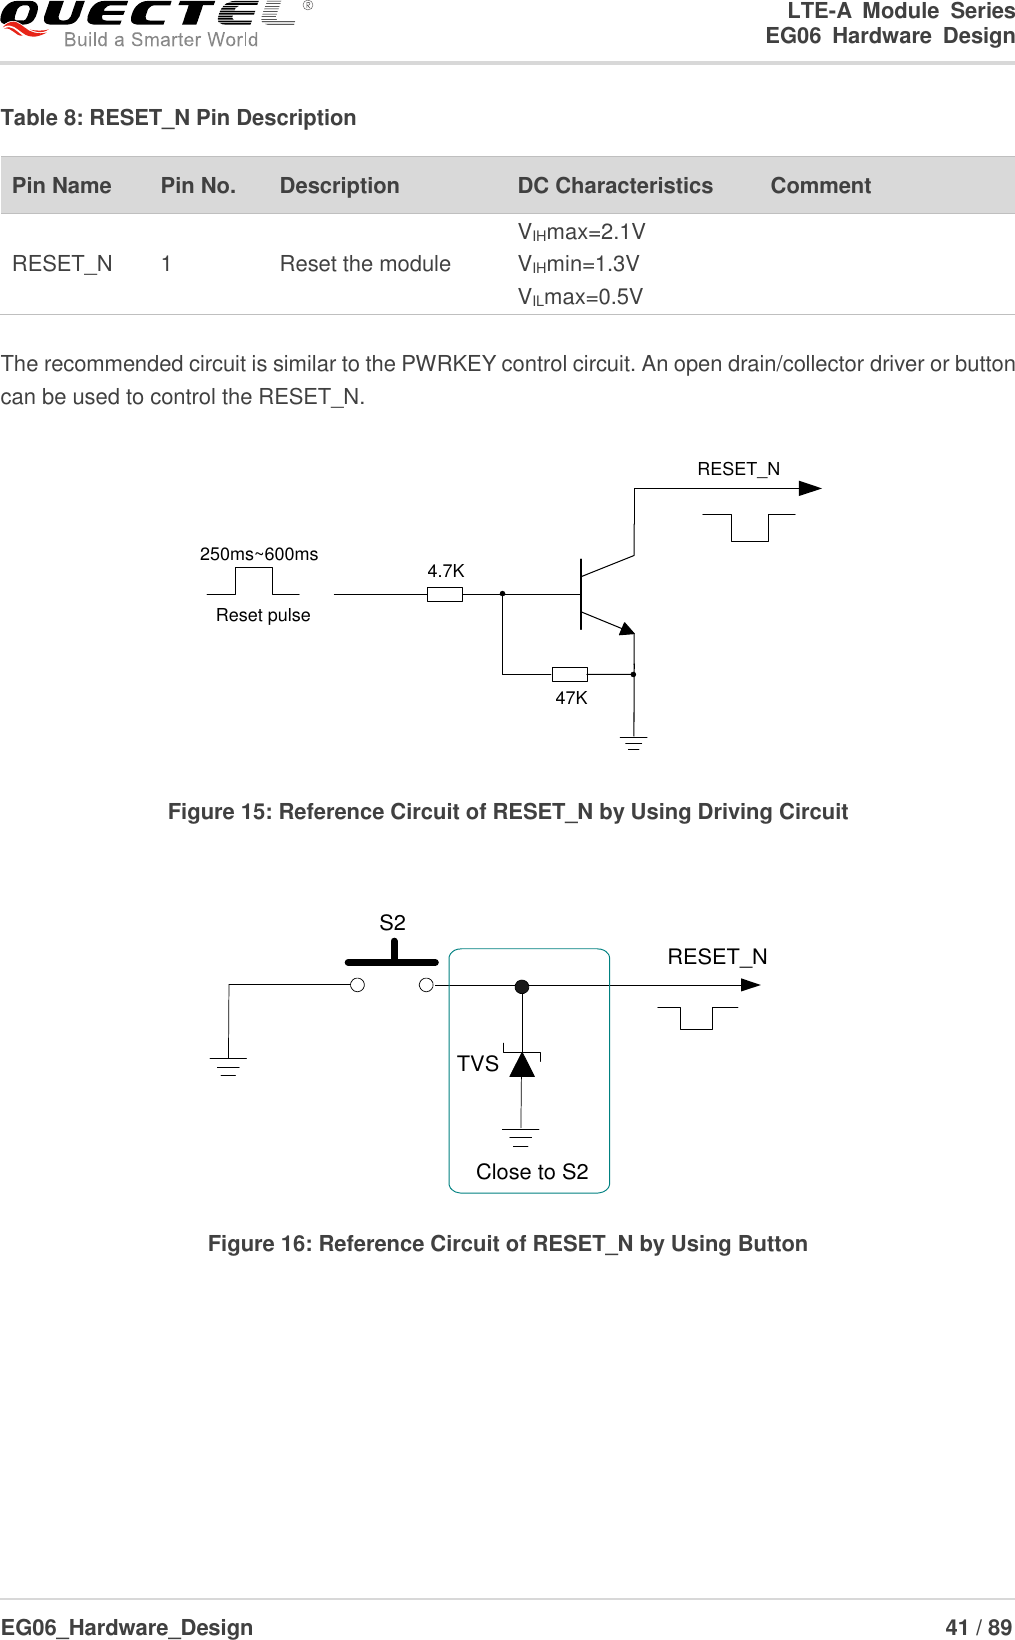 LTE-A  Module  Series                                                  EG06  Hardware  Design  EG06_Hardware_Design                                                               41 / 89    Table 8: RESET_N Pin Description  The recommended circuit is similar to the PWRKEY control circuit. An open drain/collector driver or button can be used to control the RESET_N. Reset pulseRESET_N4.7K47K250ms~600ms Figure 15: Reference Circuit of RESET_N by Using Driving Circuit  RESET_NS2Close to S2TVS Figure 16: Reference Circuit of RESET_N by Using Button         Pin Name   Pin No. Description DC Characteristics Comment RESET_N 1 Reset the module VIHmax=2.1V VIHmin=1.3V VILmax=0.5V  